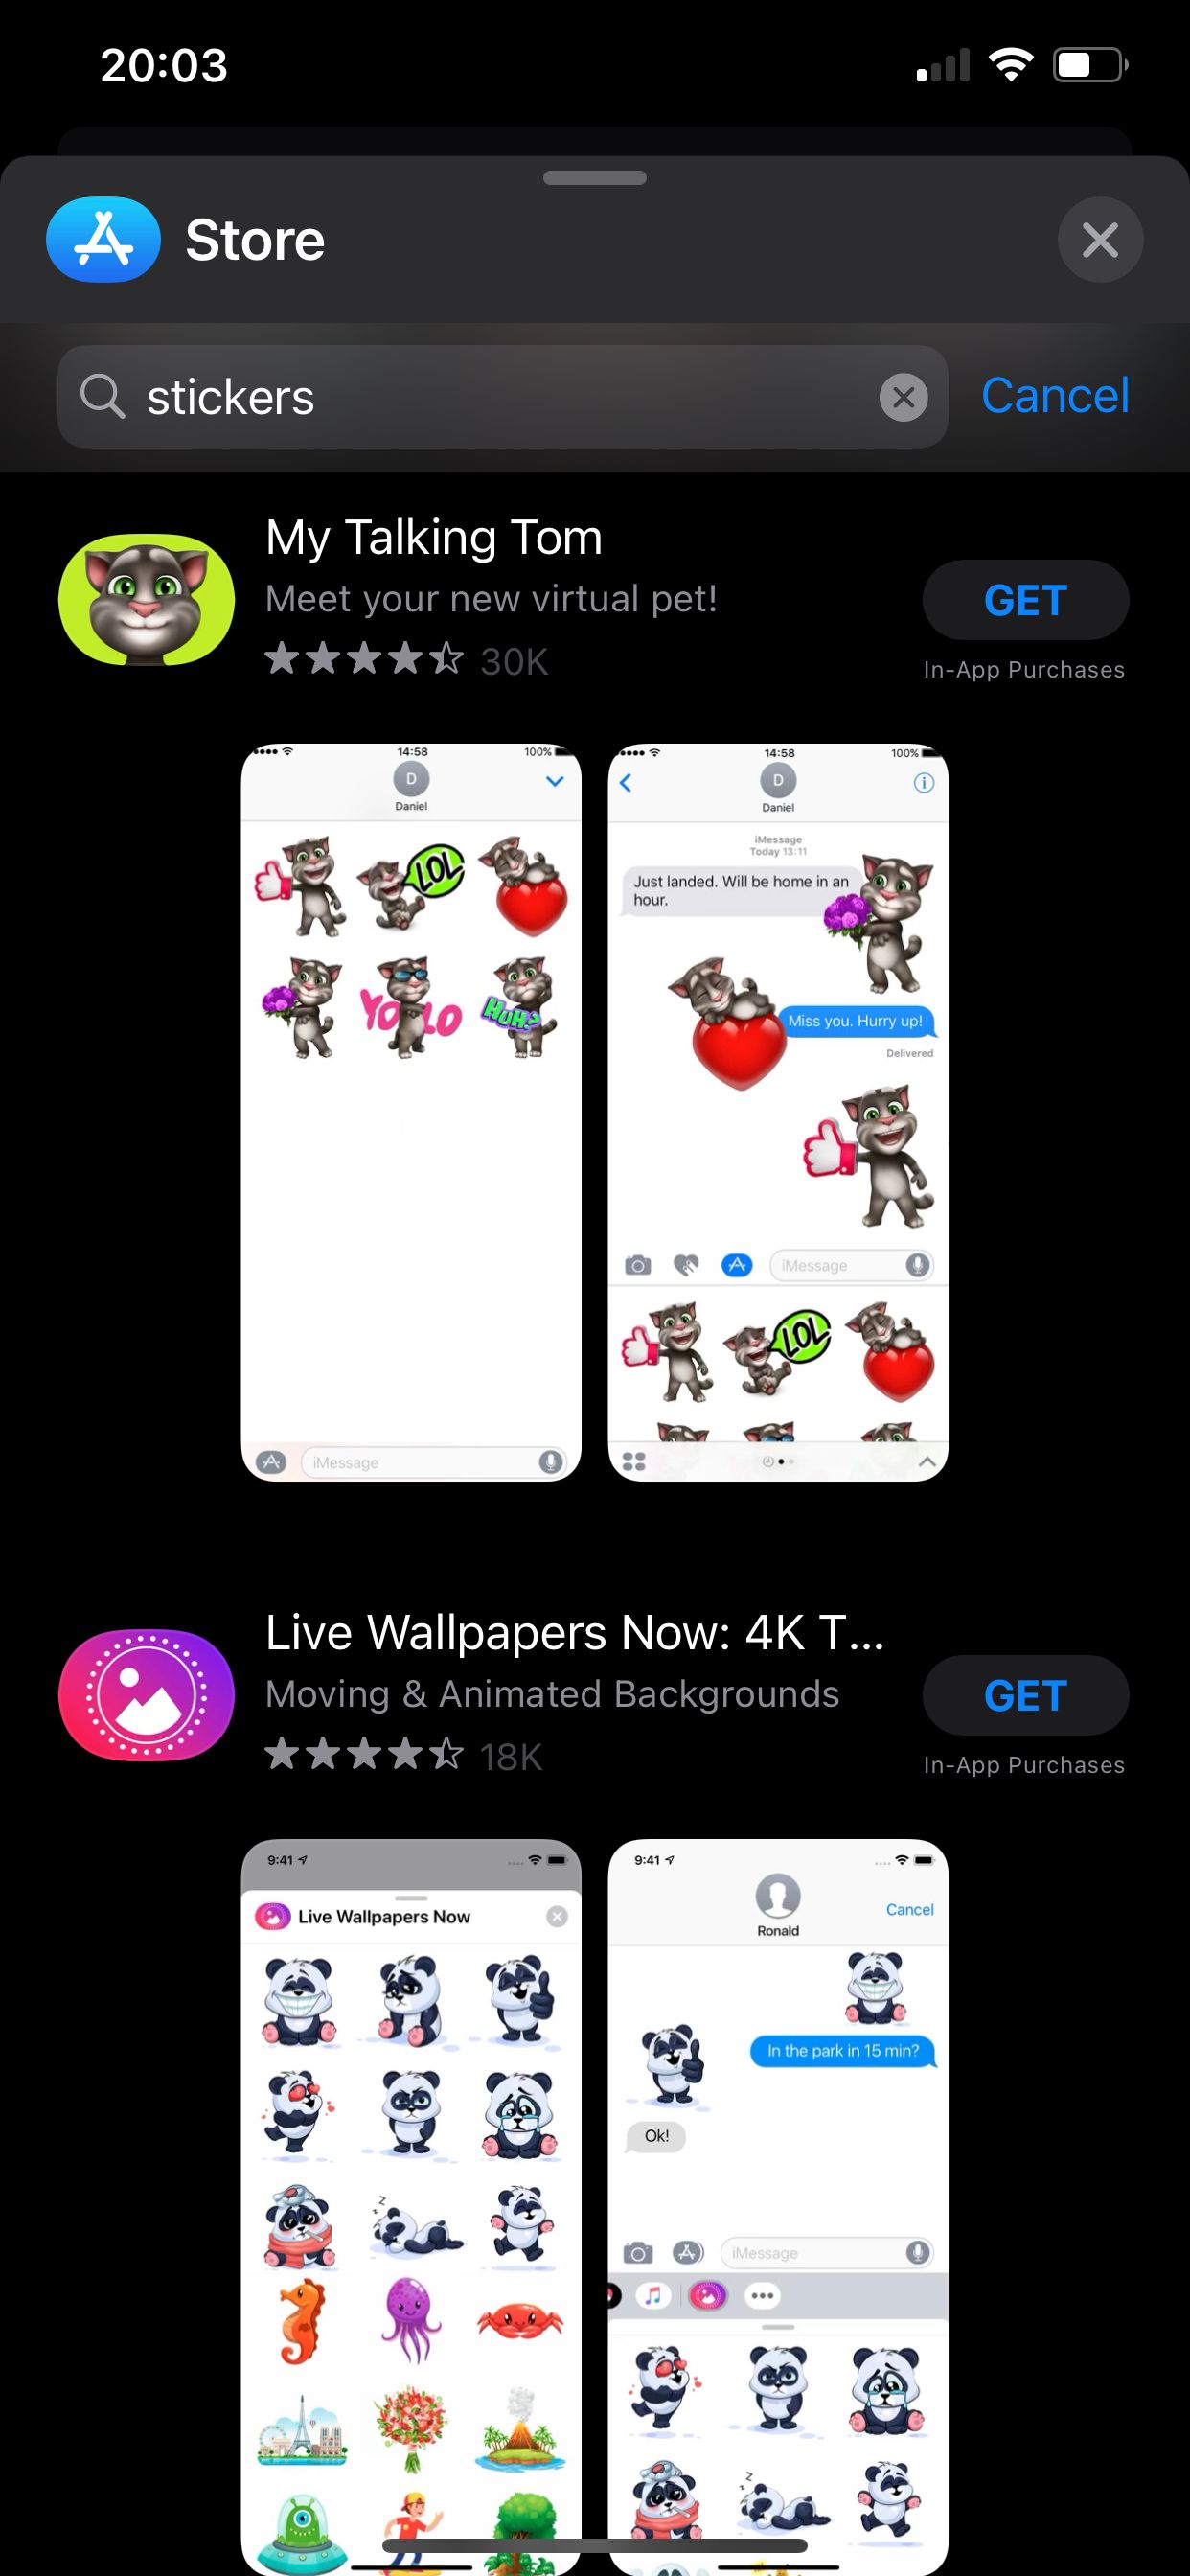 Sticker apps on the iMessage App Store